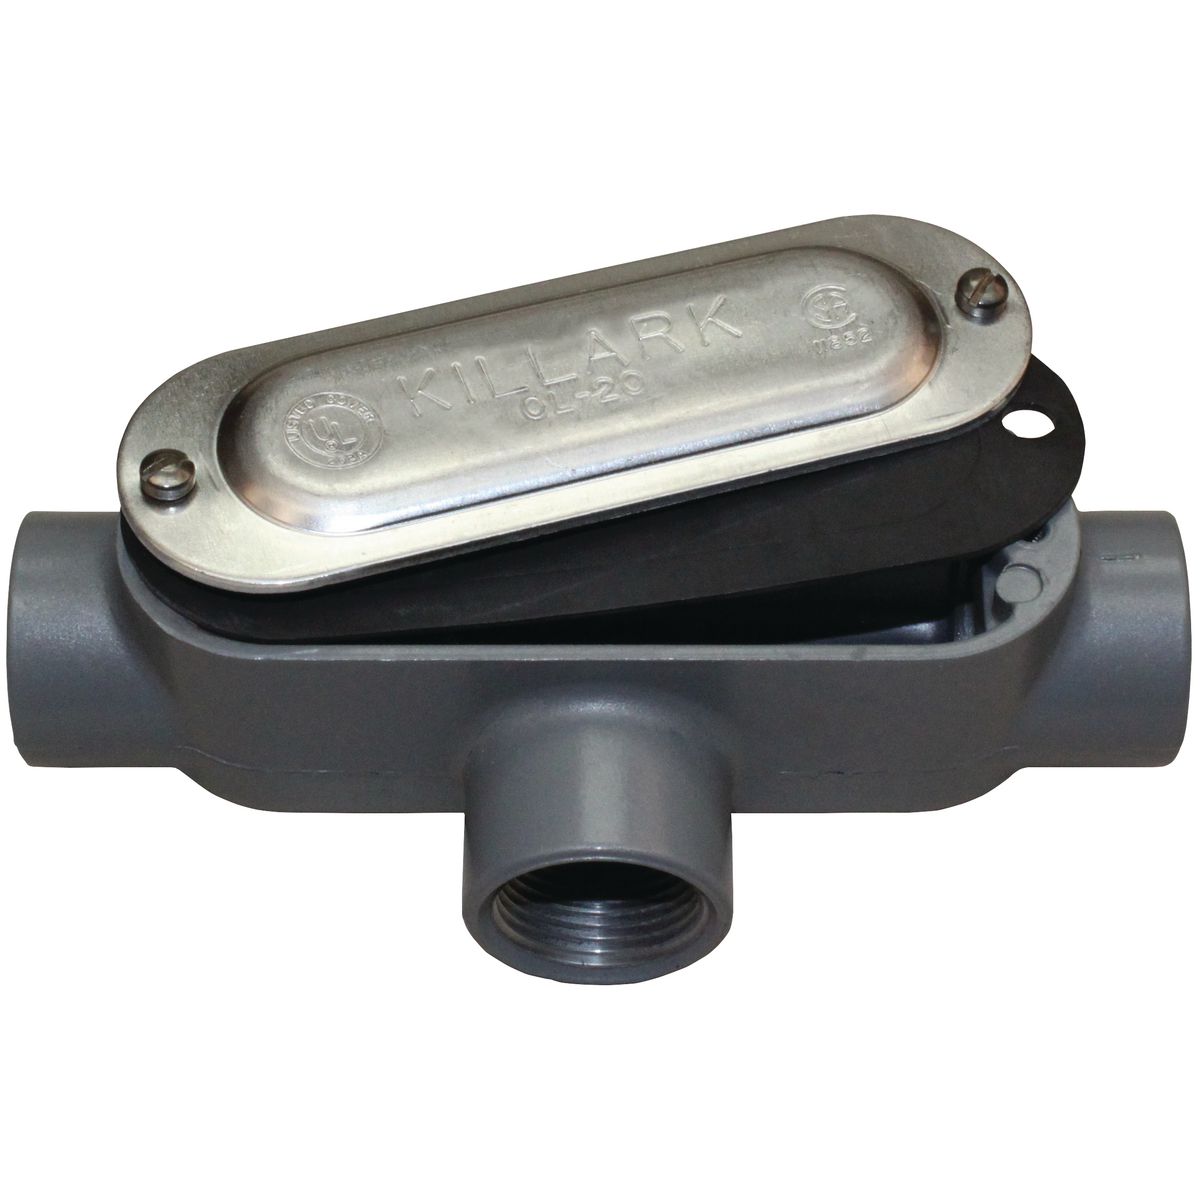 O SERIES/DURALOY 5 SERIES - ALUMINUM CONDUIT BODY WITH COVER AND GASKET- T TYPE - HUB SIZE 1 INCH - VOLUME 12.0 CUBIC INCHES